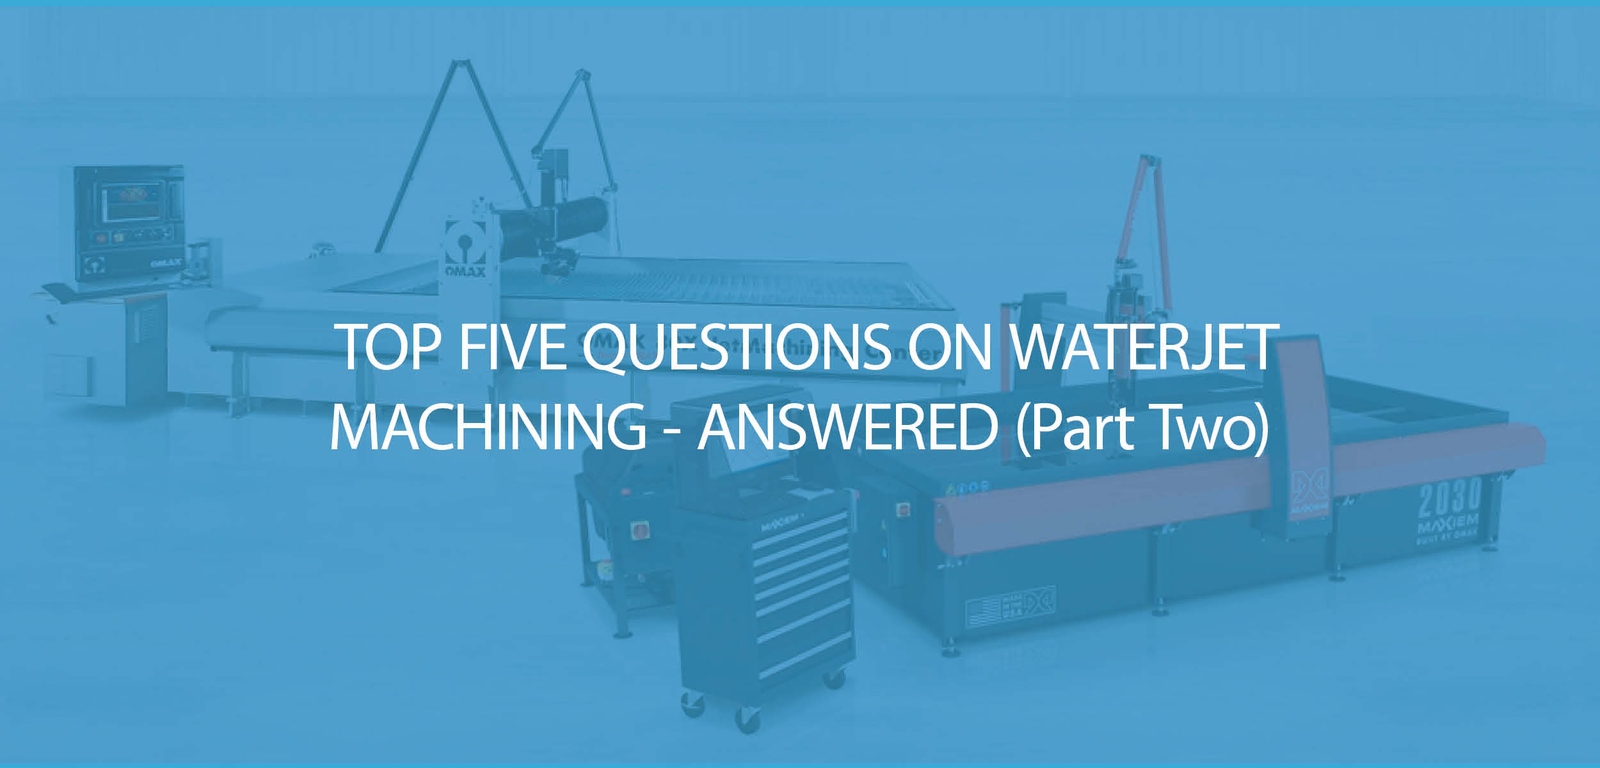 Waterjet Machining – Your Top Five Questions Answered, Part Two